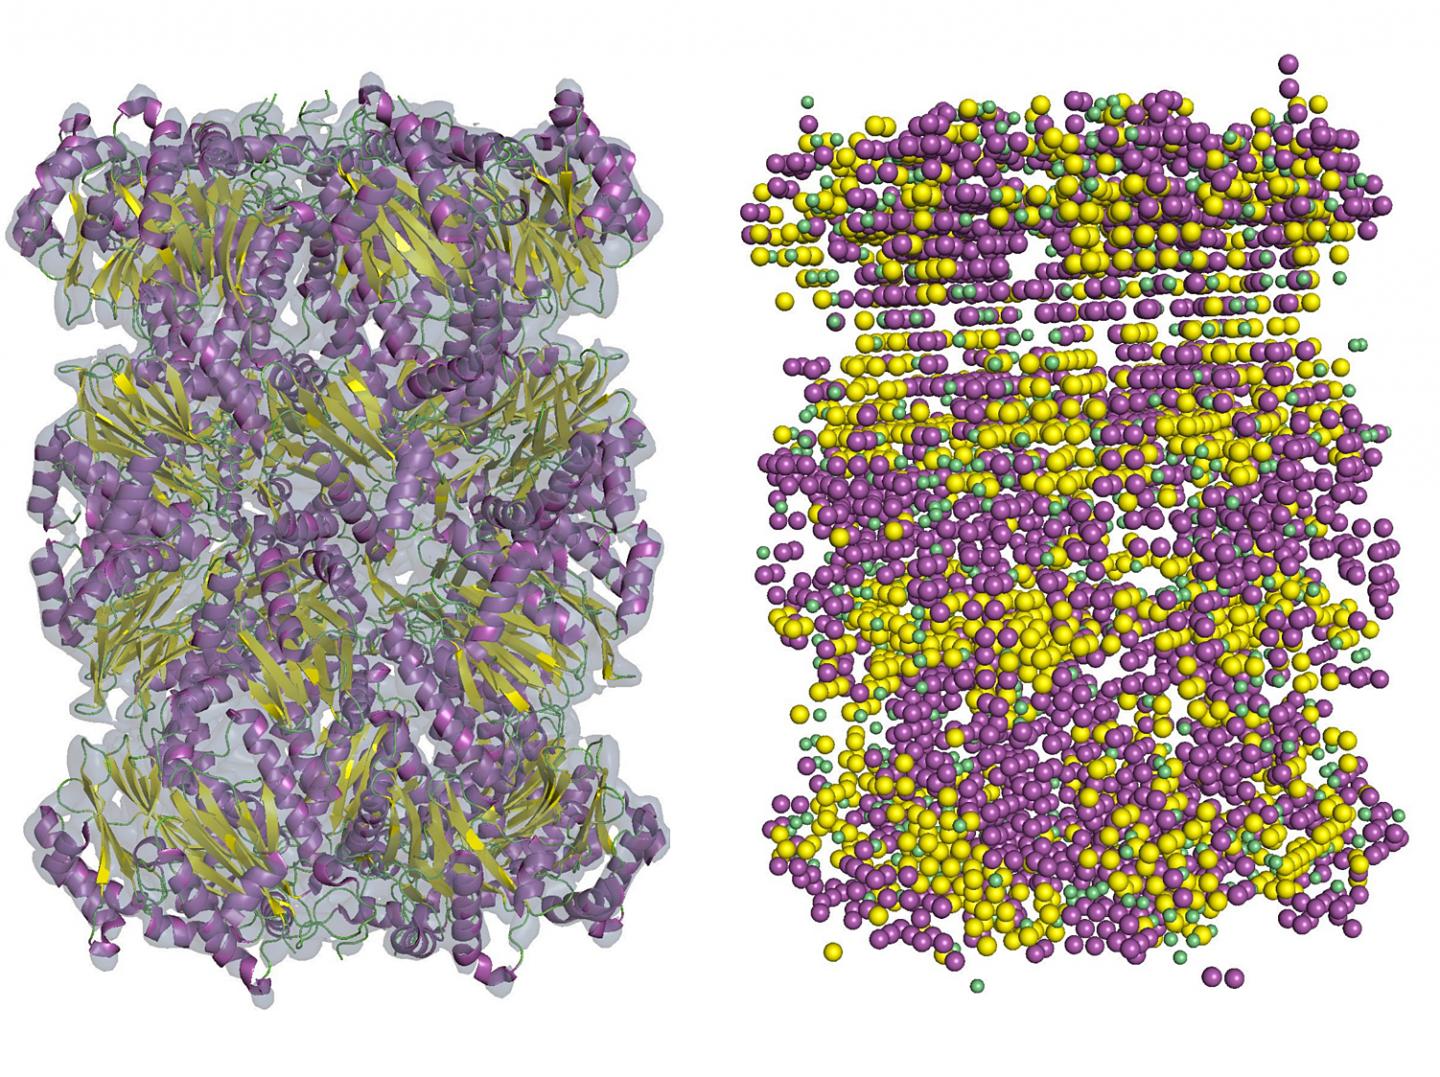 Improved Protein Structure Detection